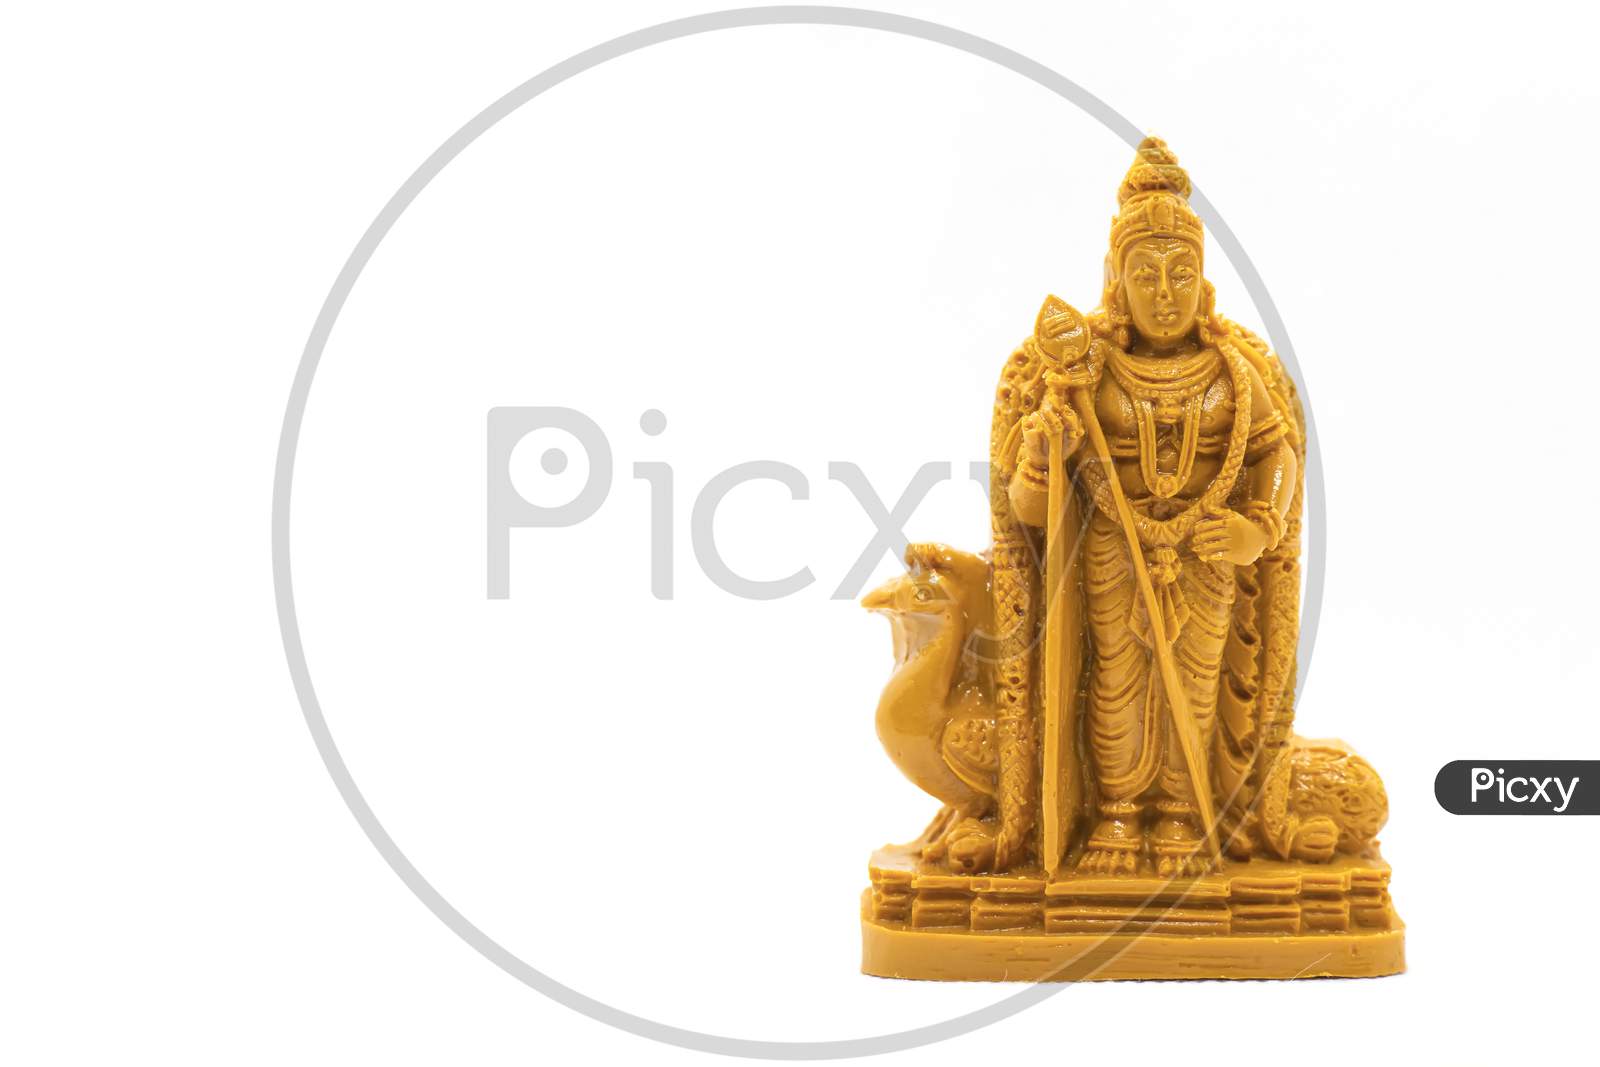 The Hand-Carved Wooden Statue Of Lord Murugan Is Isolated On A White Background